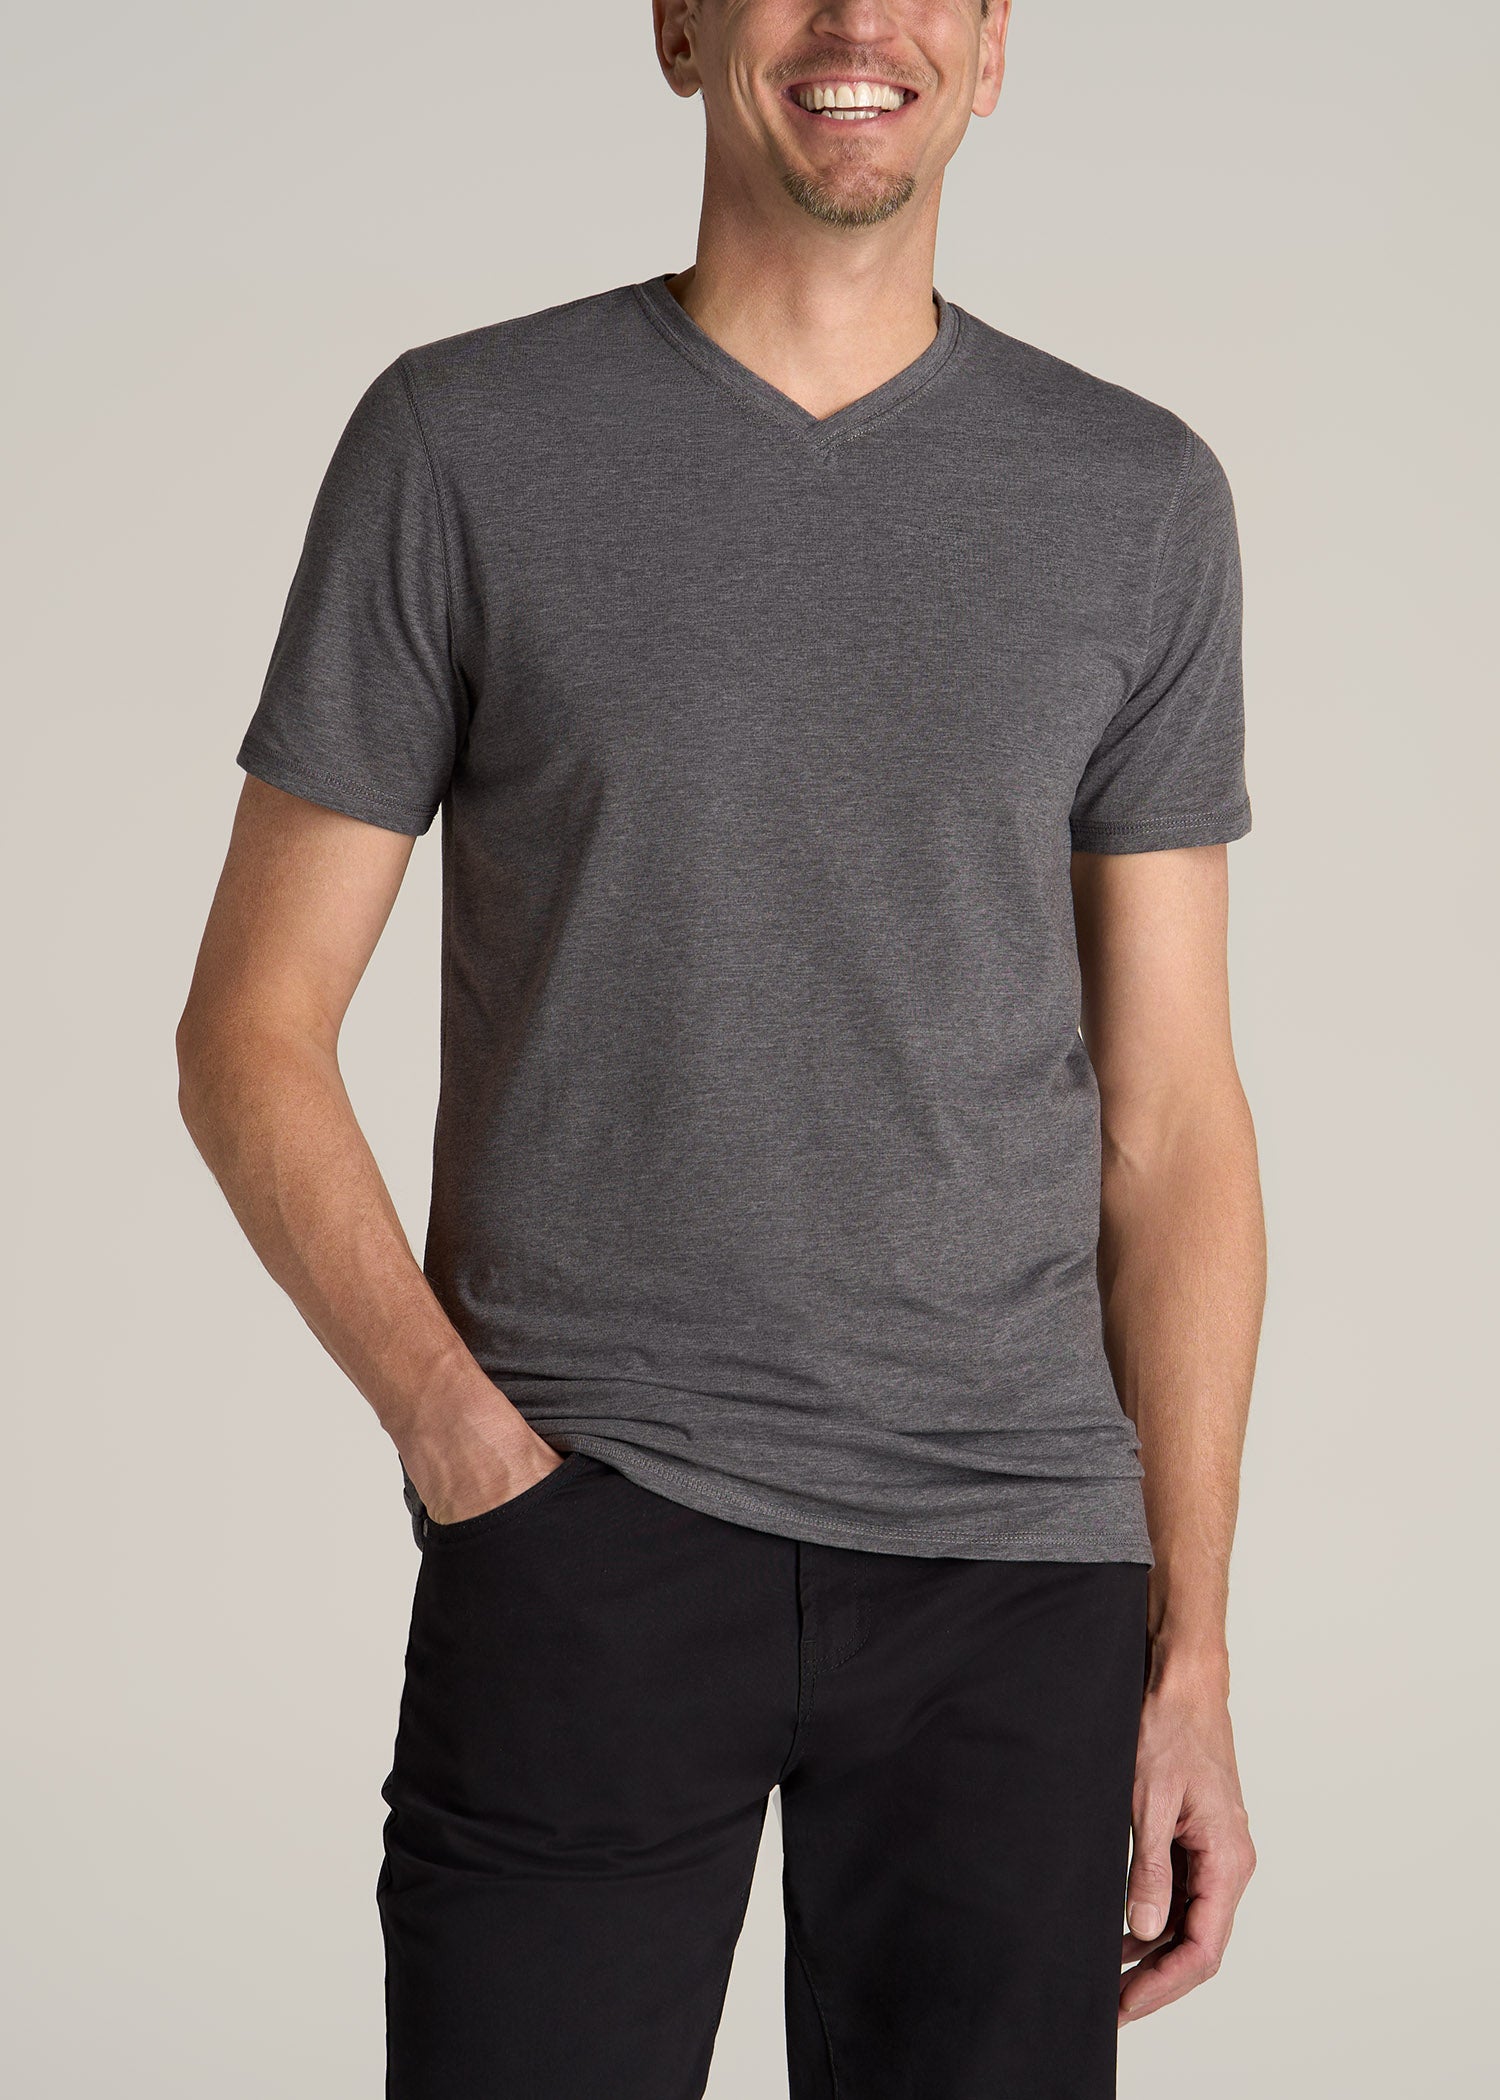 American-Tall-Men-The-Essential-REGULAR-FIT-V-Neck-Men-Tee-Charcoal-Mix-front